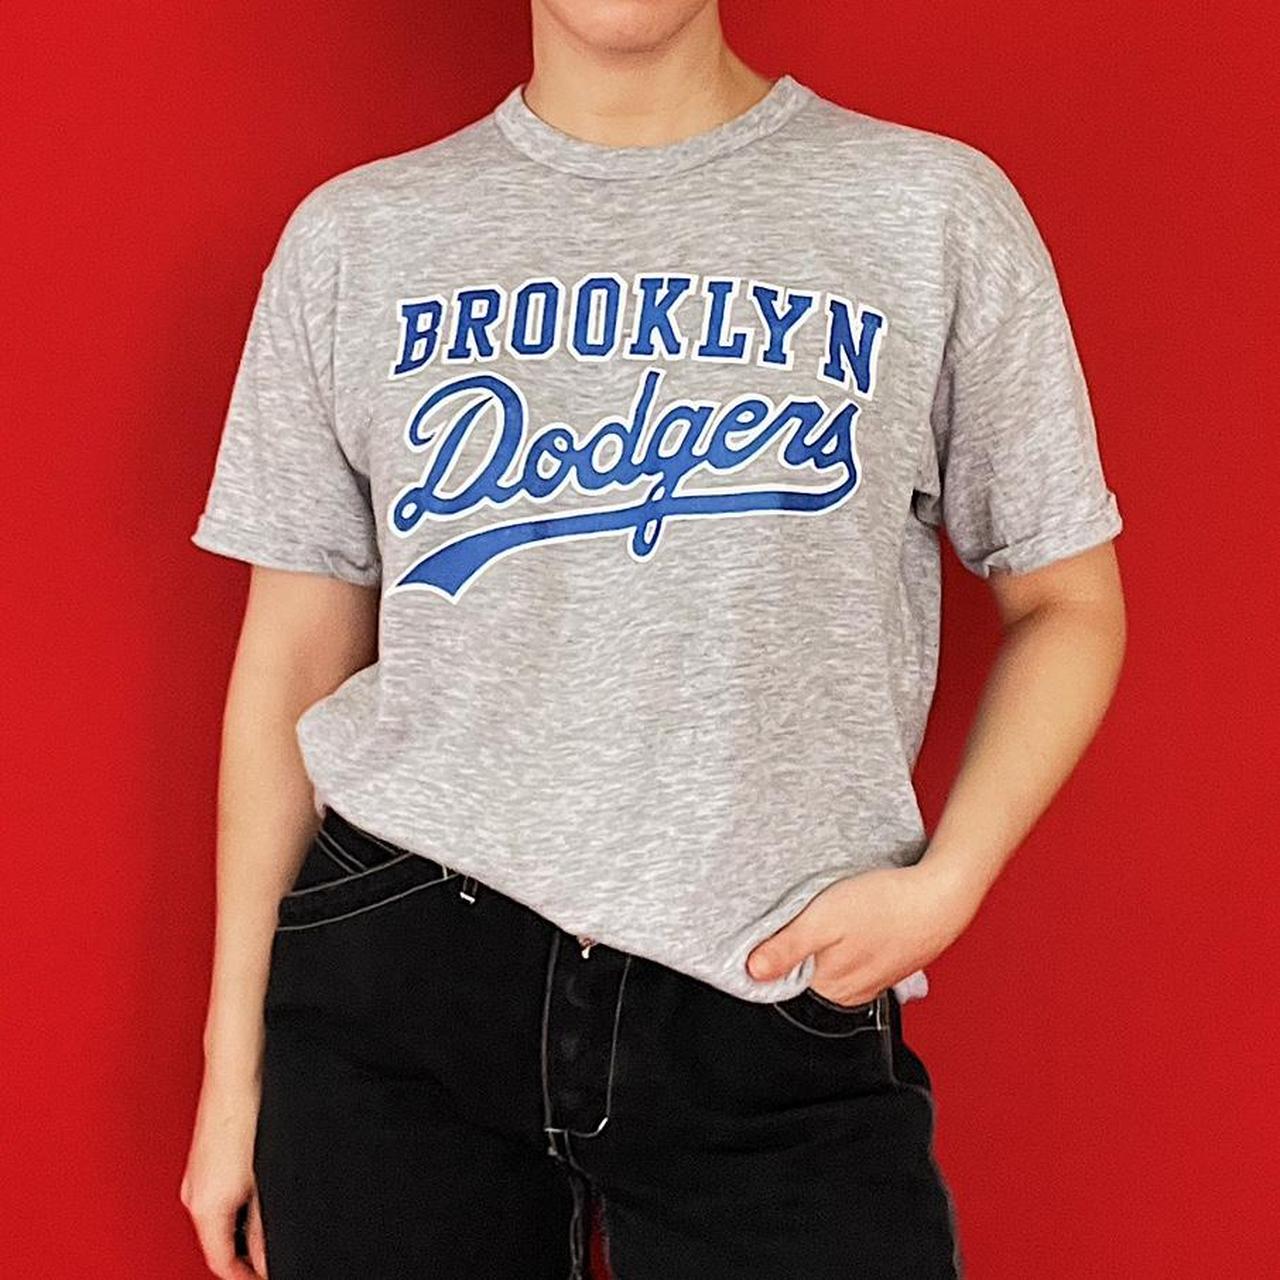 Dodgers 3/4 sleeve Woman's T-shirt NEW with tags - Depop